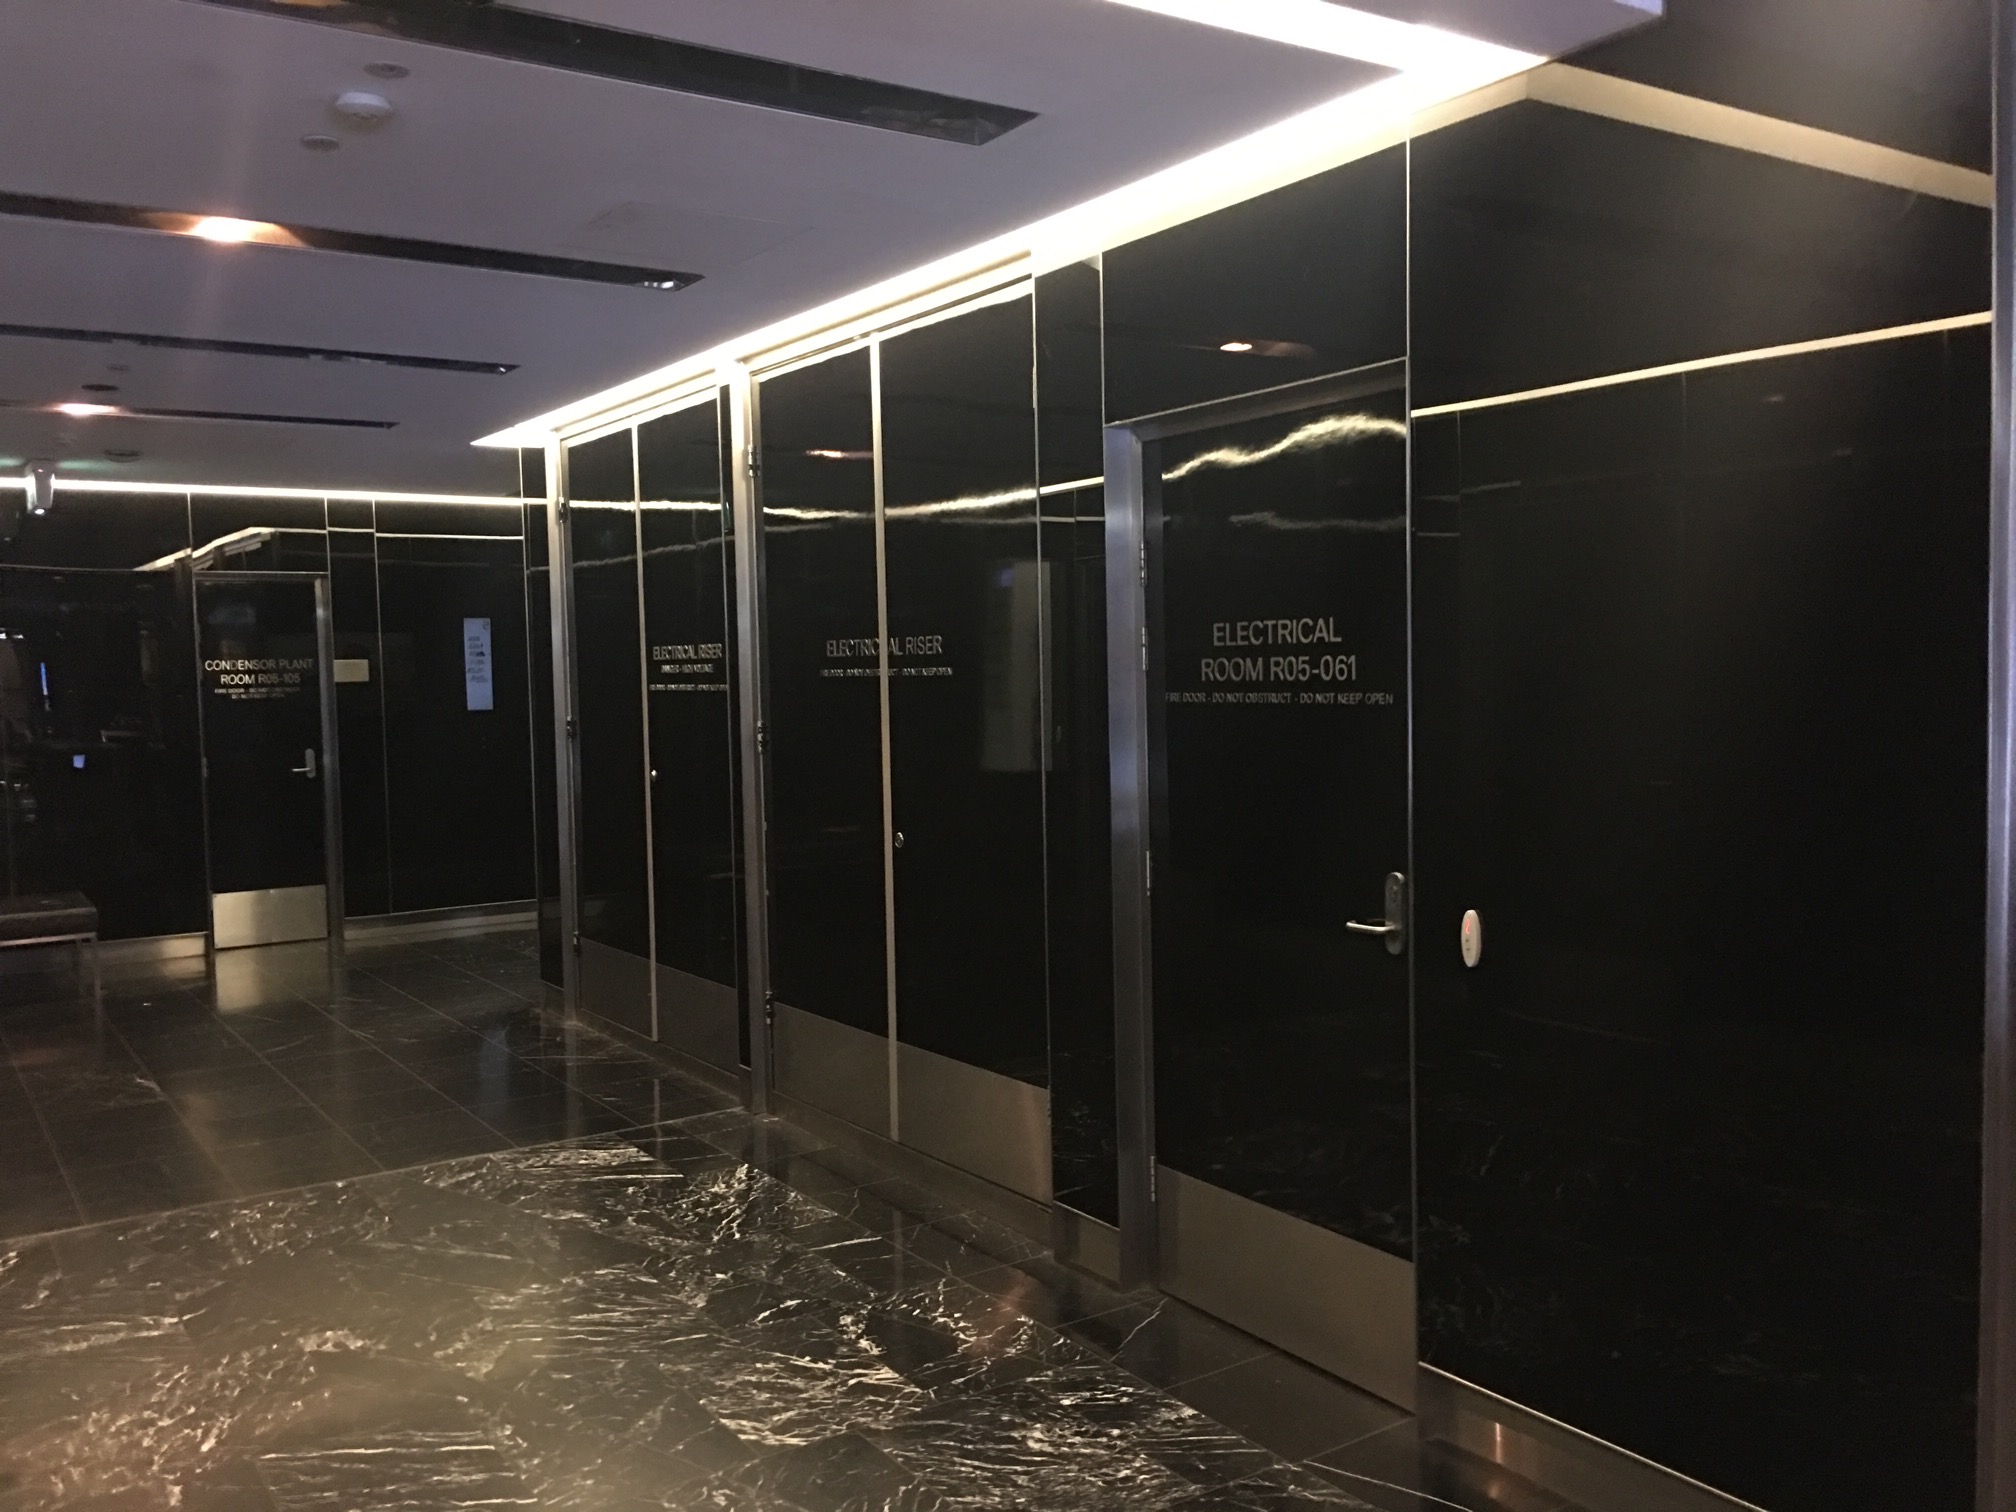 Application of the tempered glass in the elevator cabin